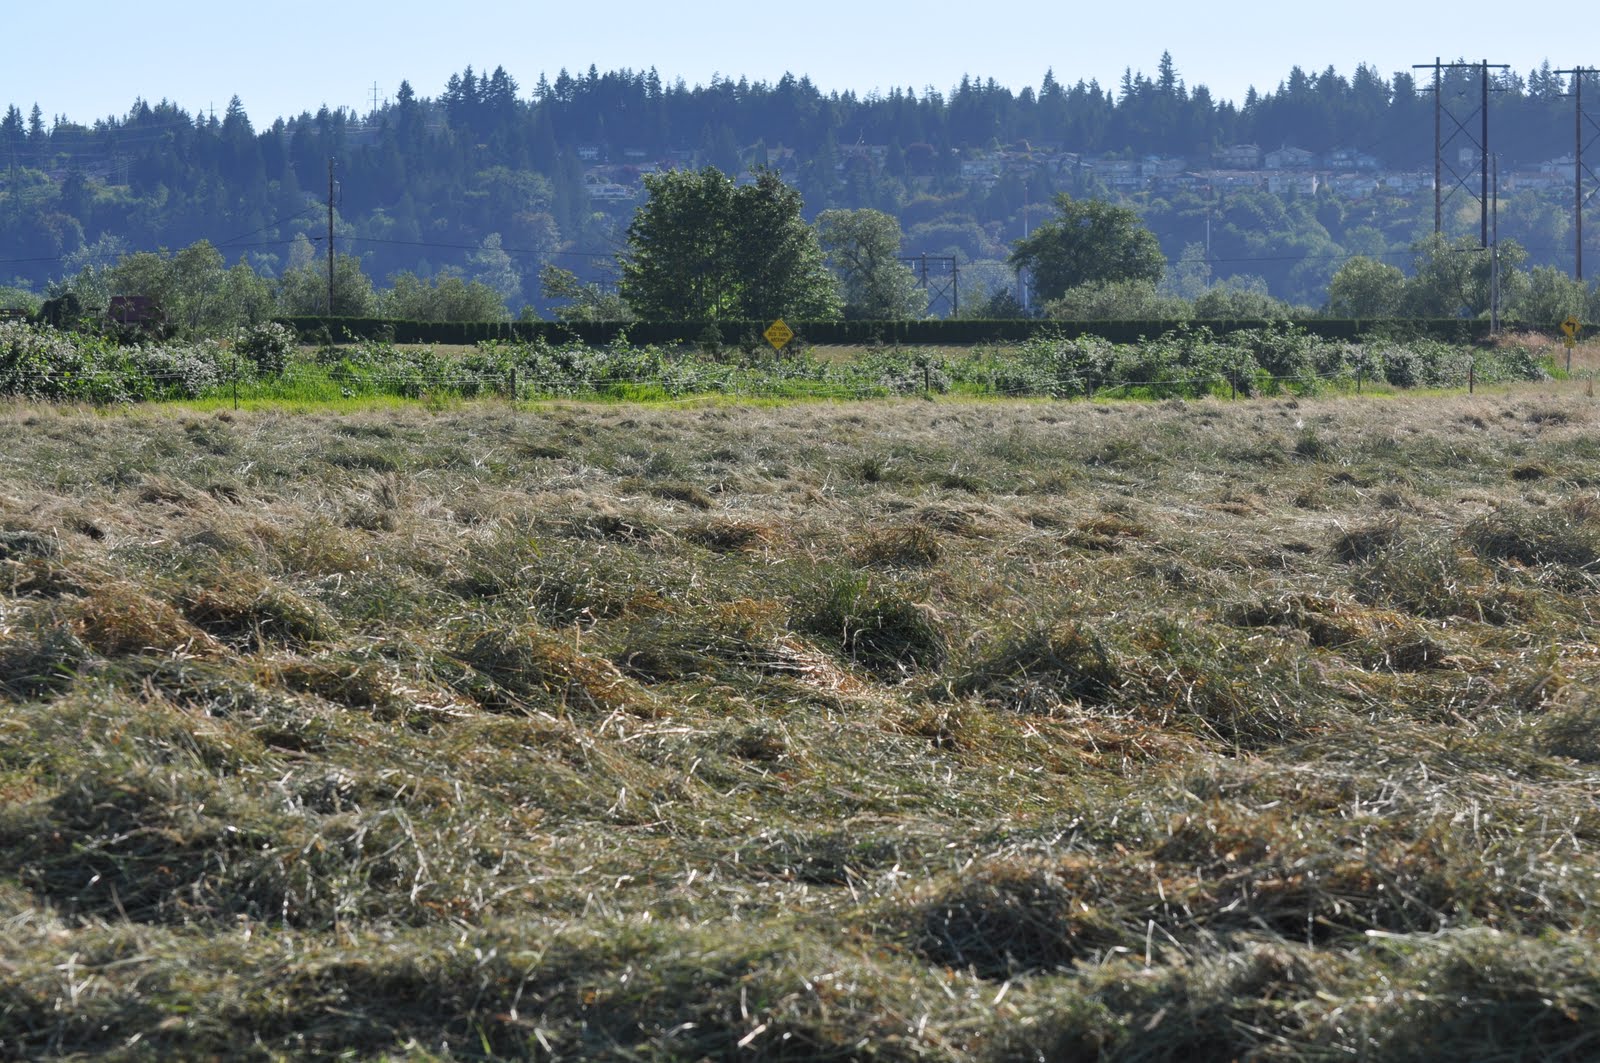 What is a Hay Bale and What is it Made From?